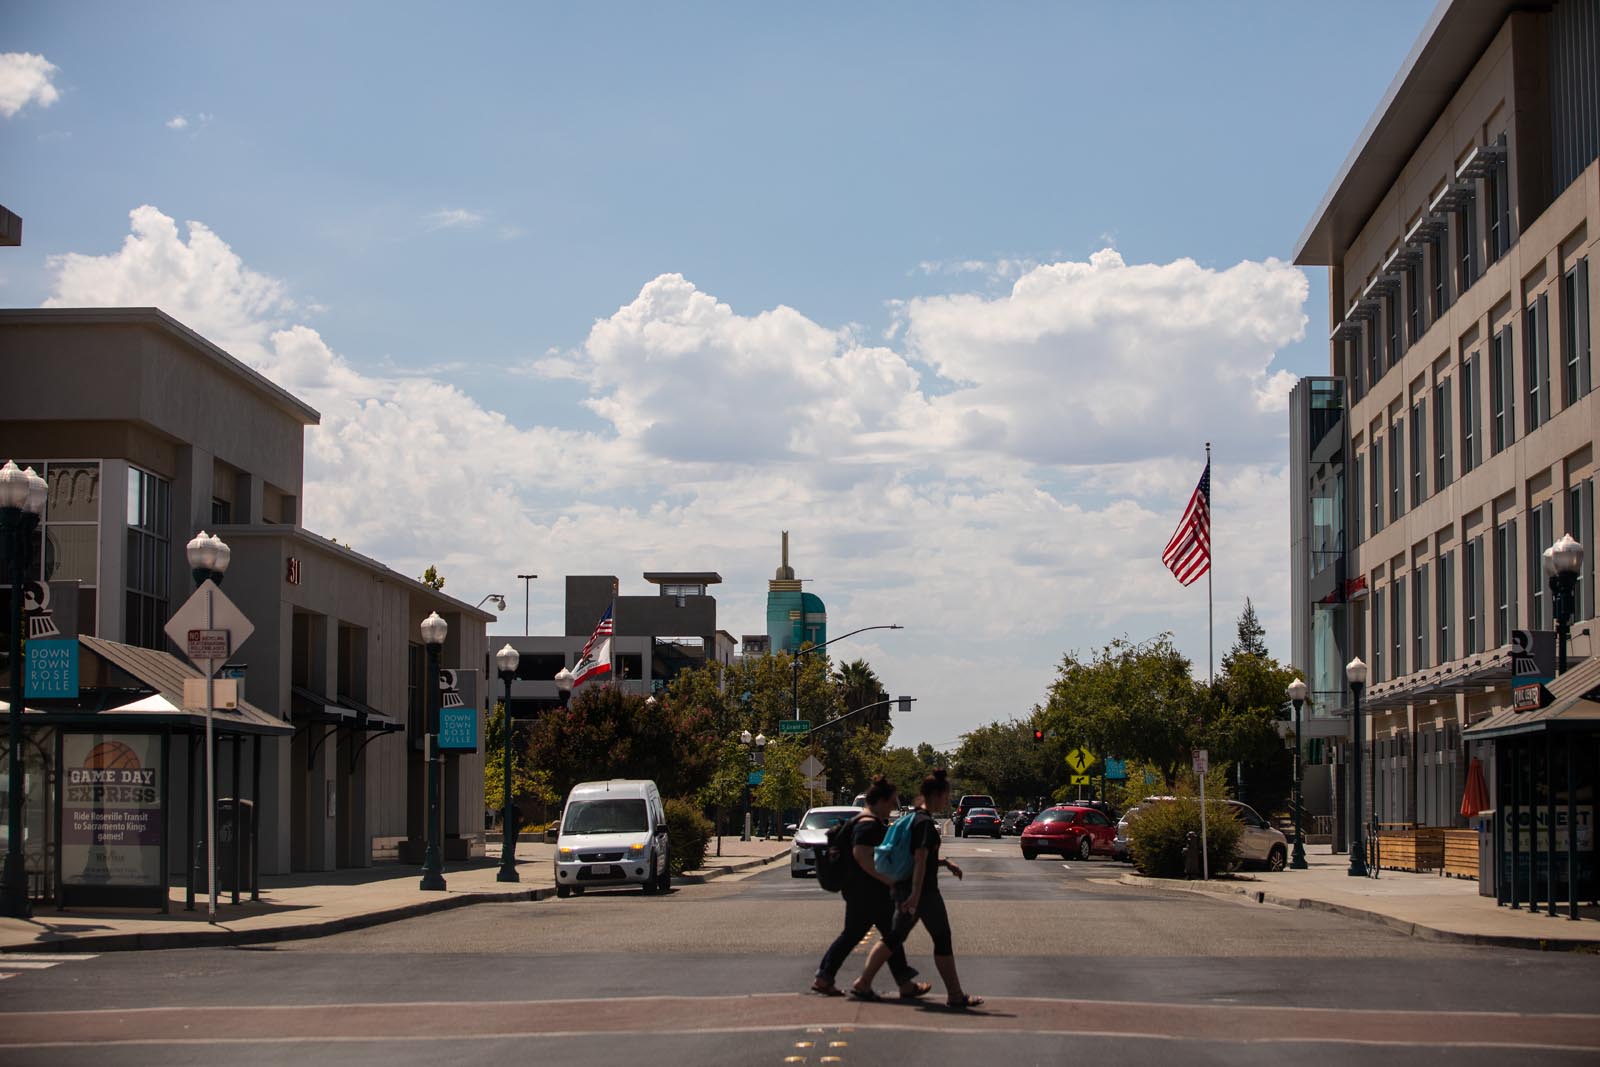 View of Downtown Roseville